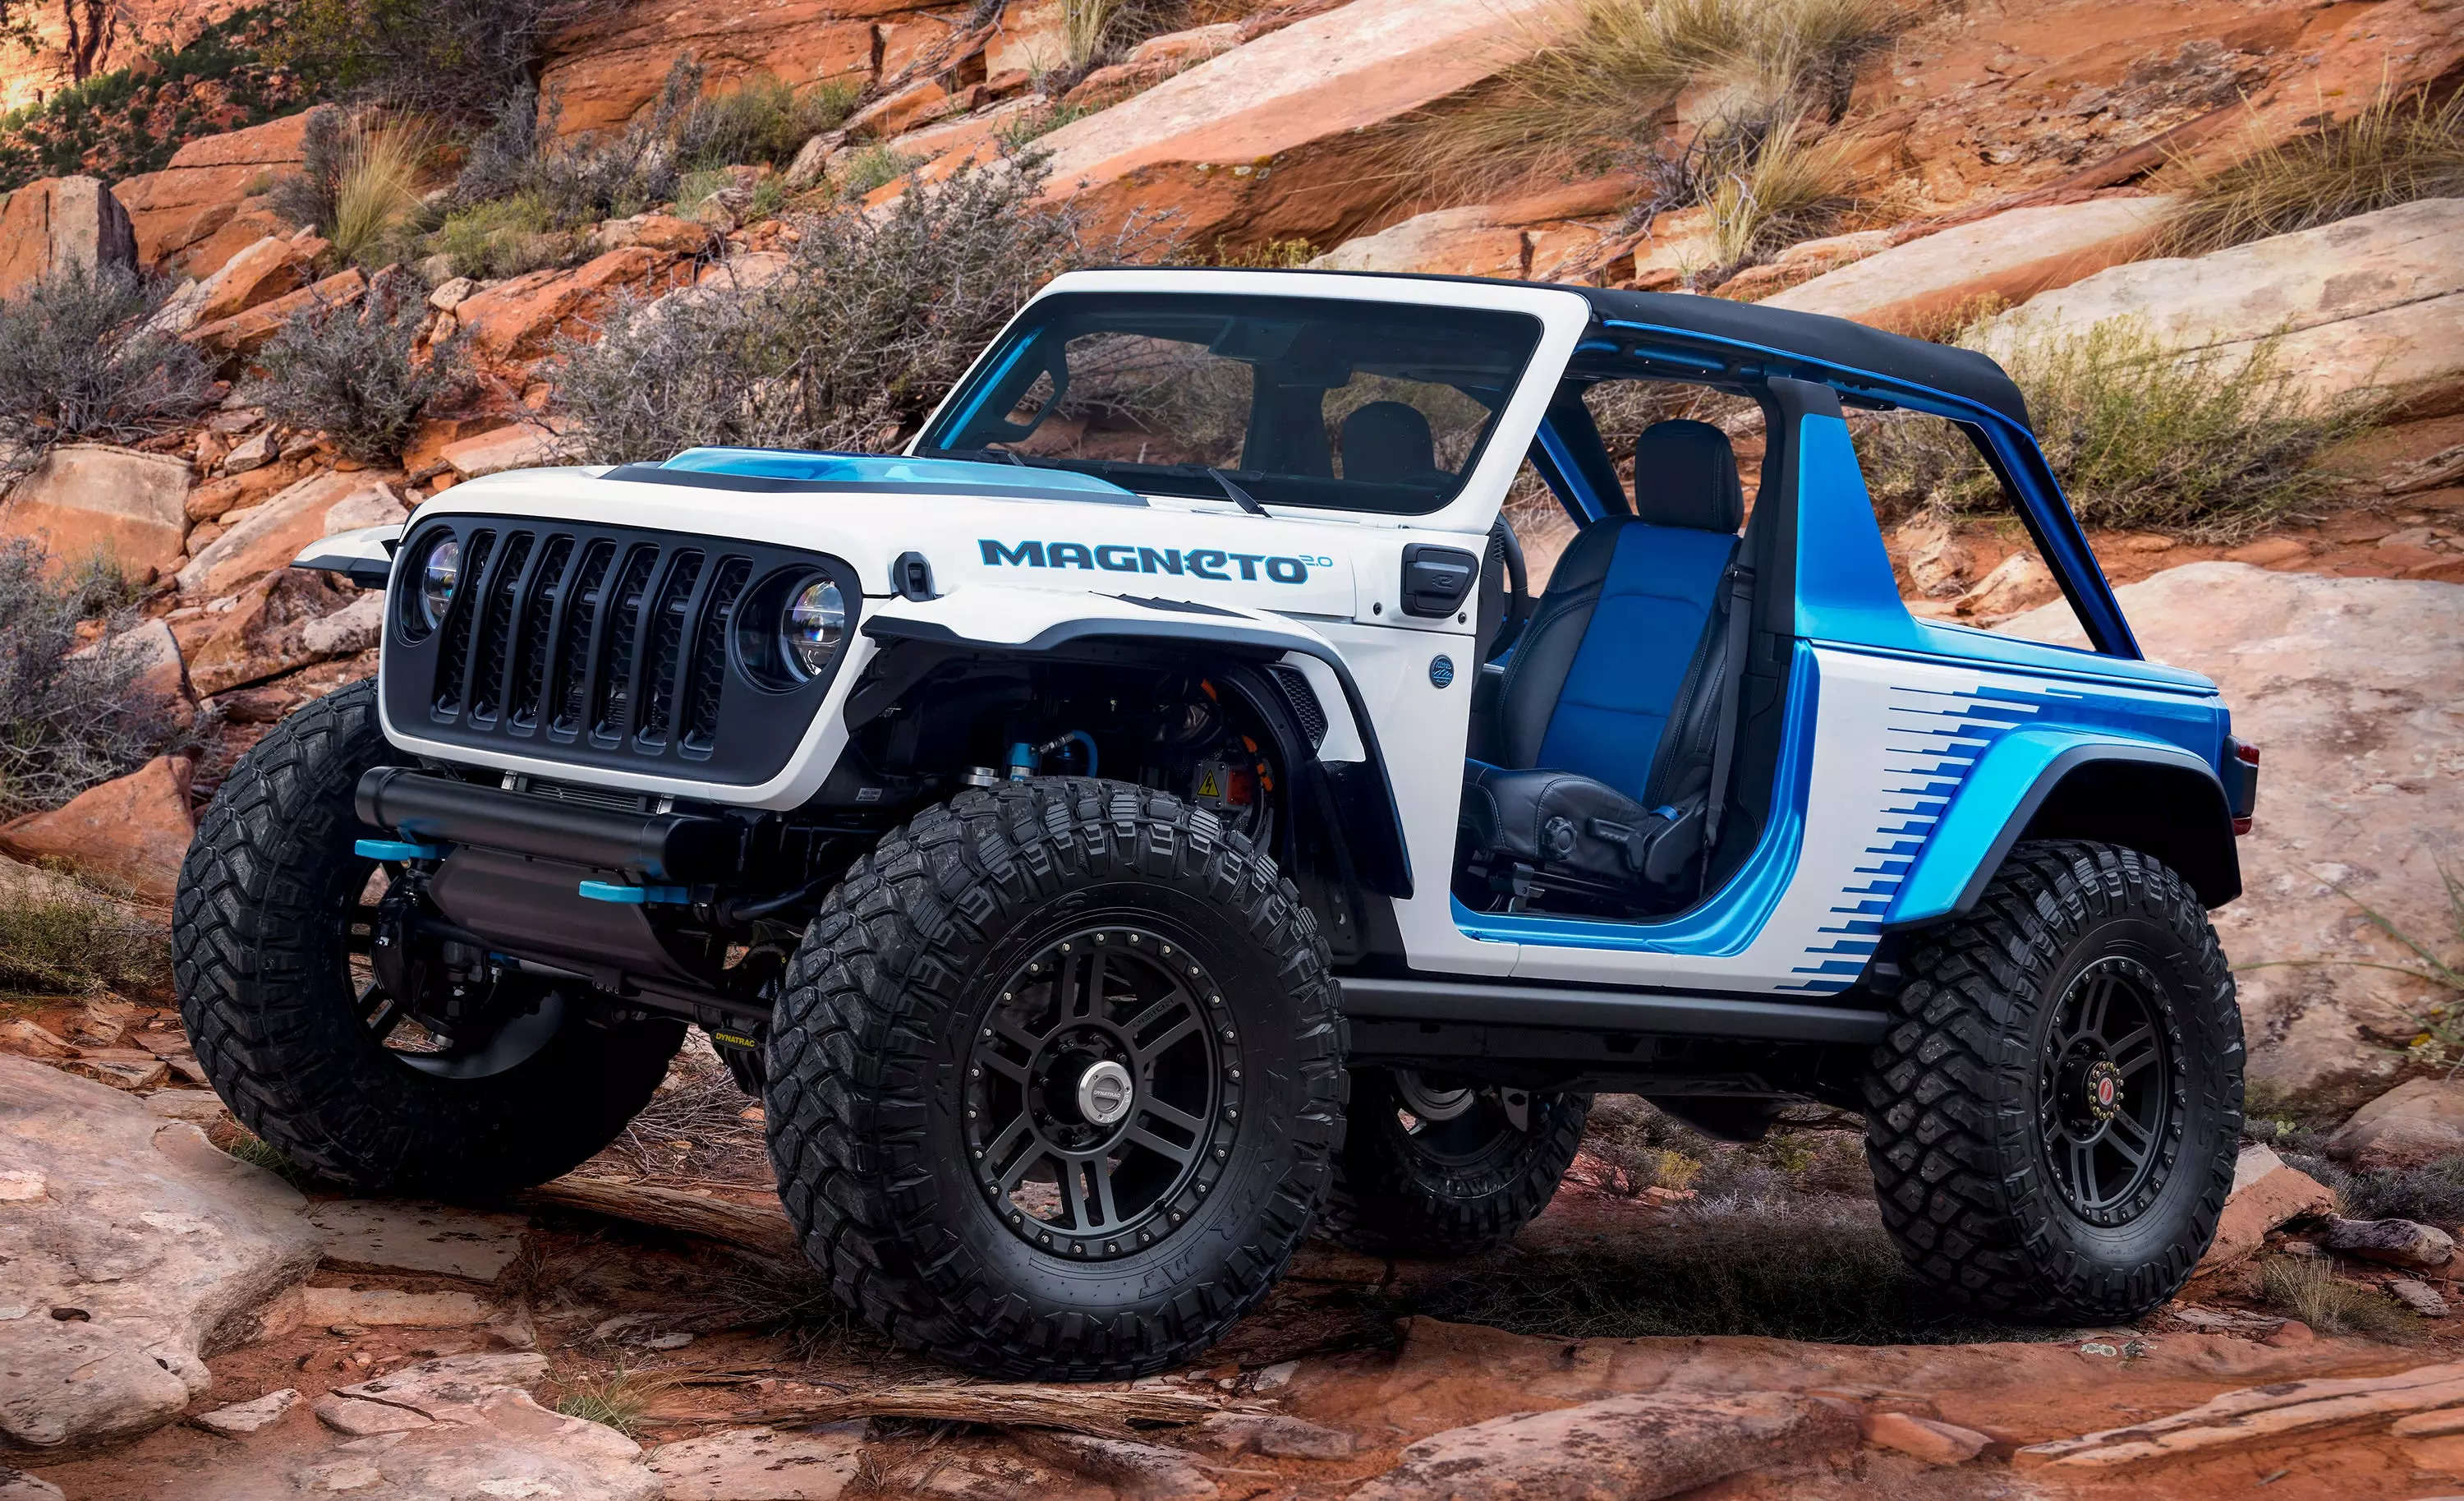 Jeep says its new electric Wrangler concept goes 0-60 mph in 2 seconds,  matching Tesla's $136,000 car | Business Insider India